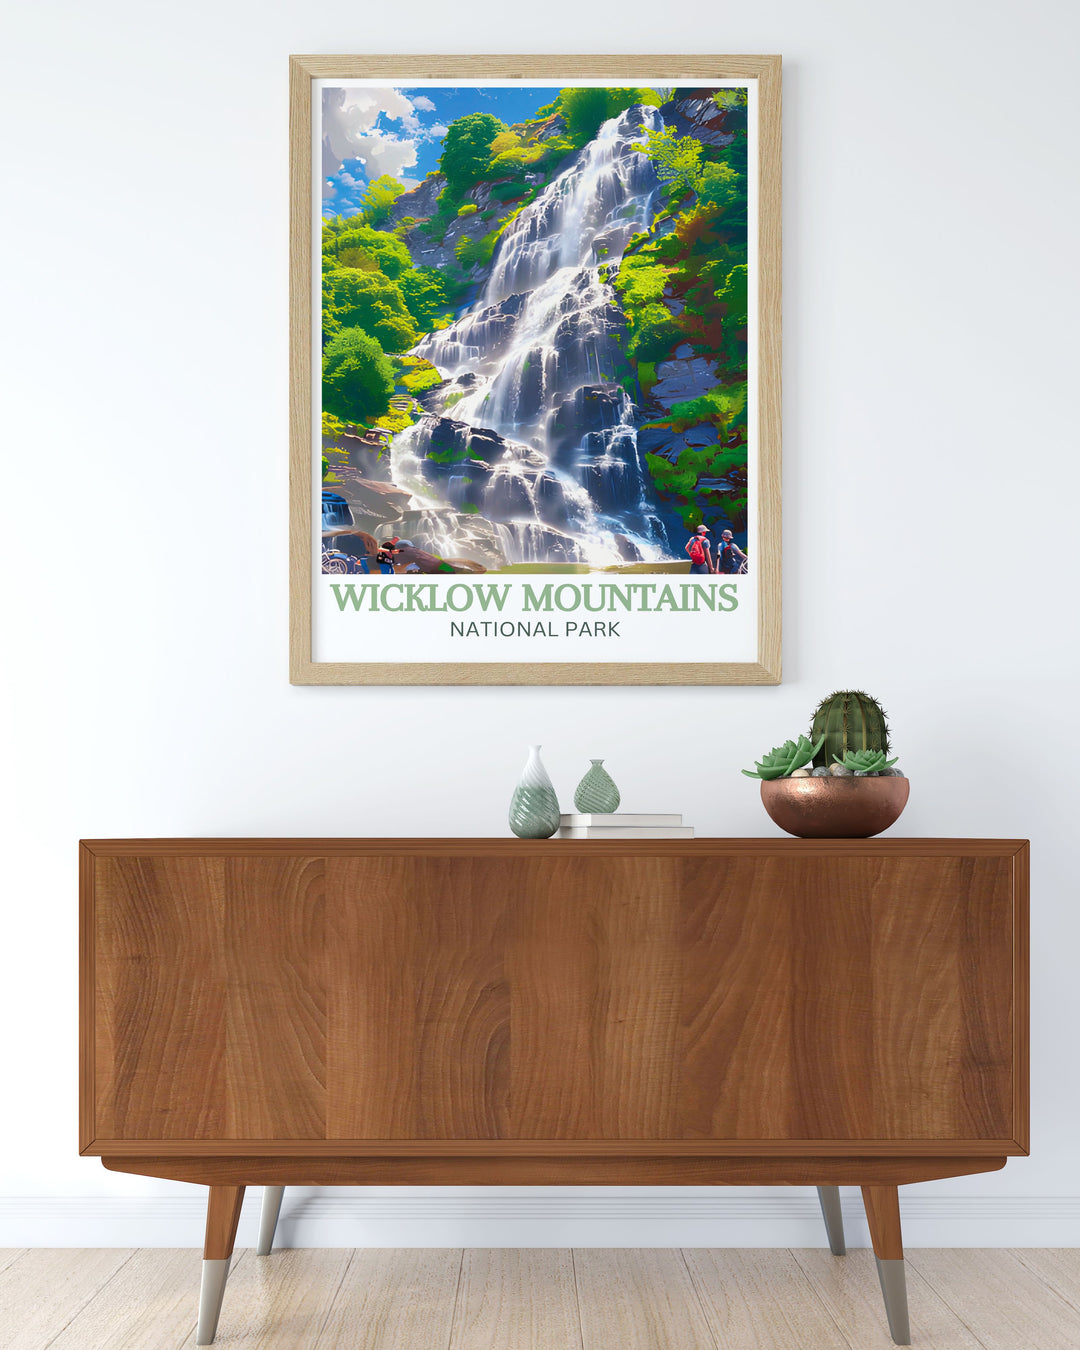 Elegant gallery wall art showcasing the historic Glendalough Valley in Wicklow Mountains National Park. This piece captures the ancient monastic ruins and serene lakes, adding a touch of Irelands rich history and spiritual charm to your home decor.